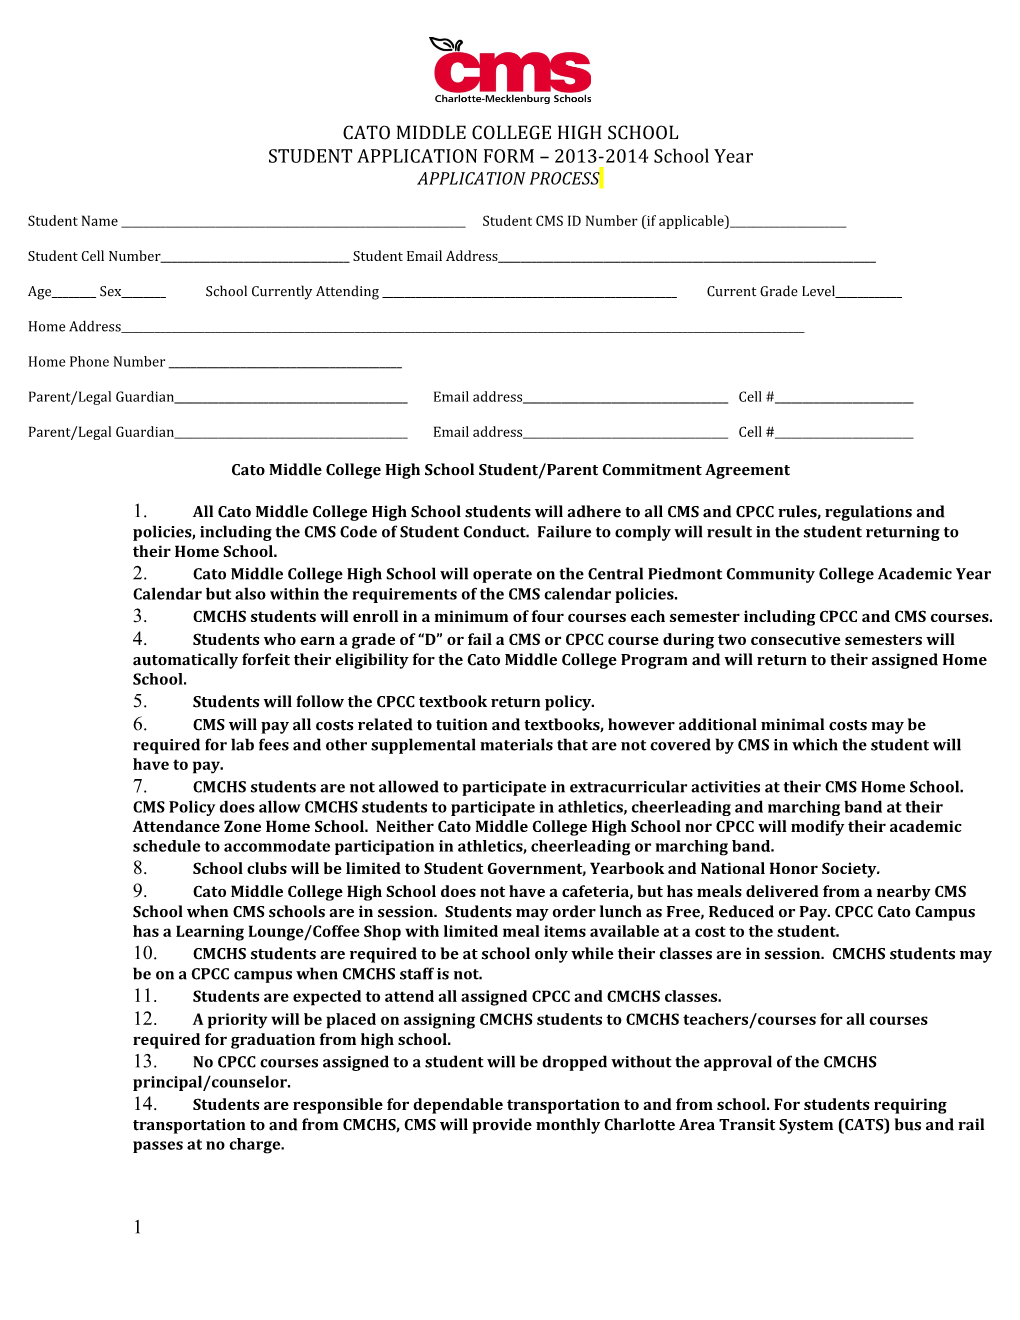 Cato Middle College High School 2013 2014 Application Packet